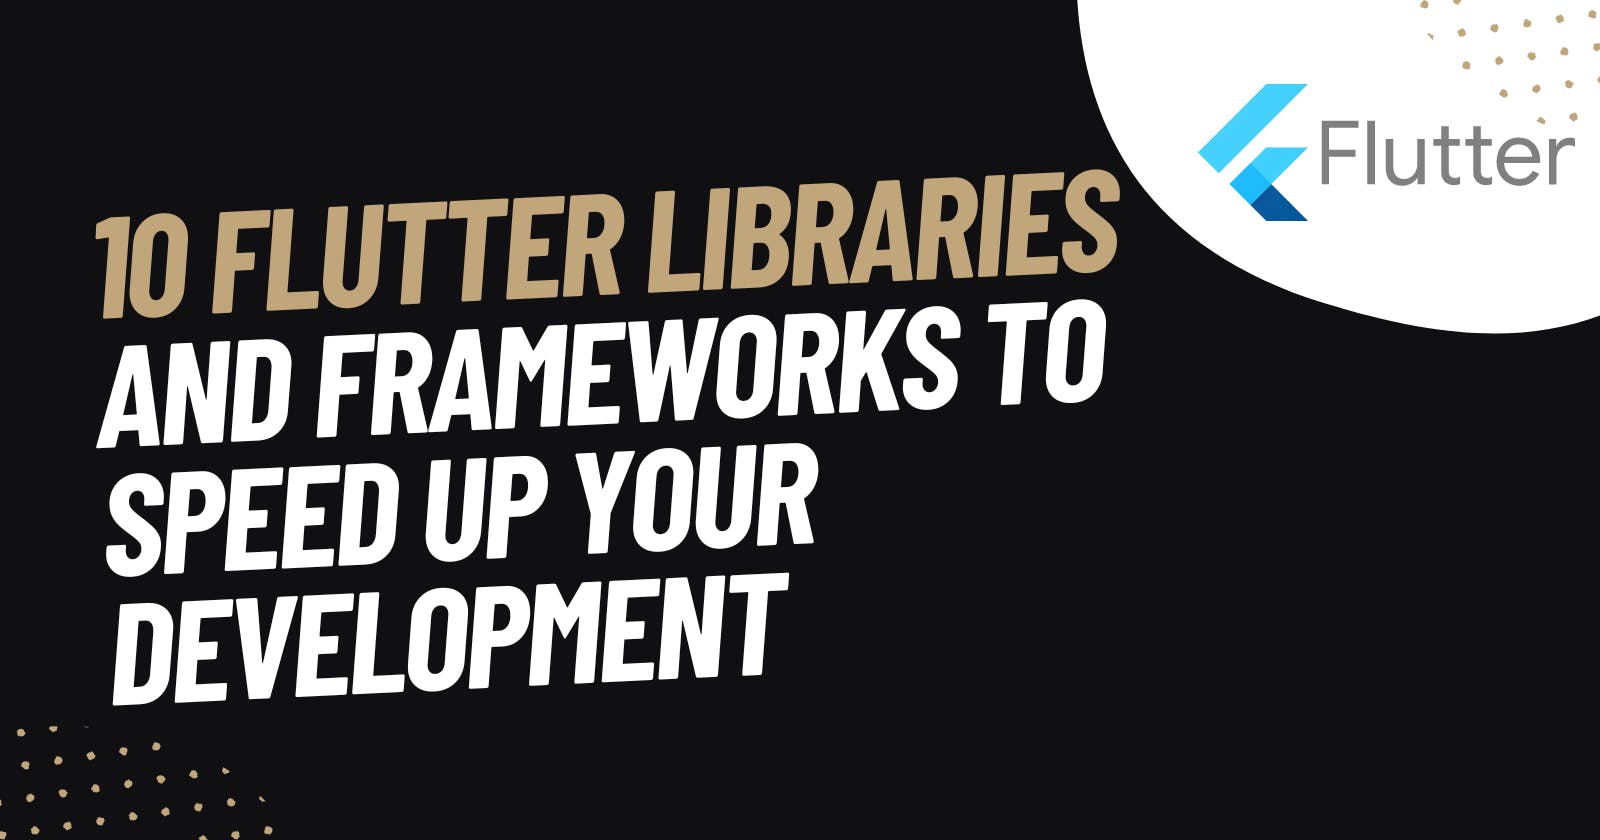 🚀 List Of 10 Flutter Libraries and Frameworks to Speed Up Your Development: